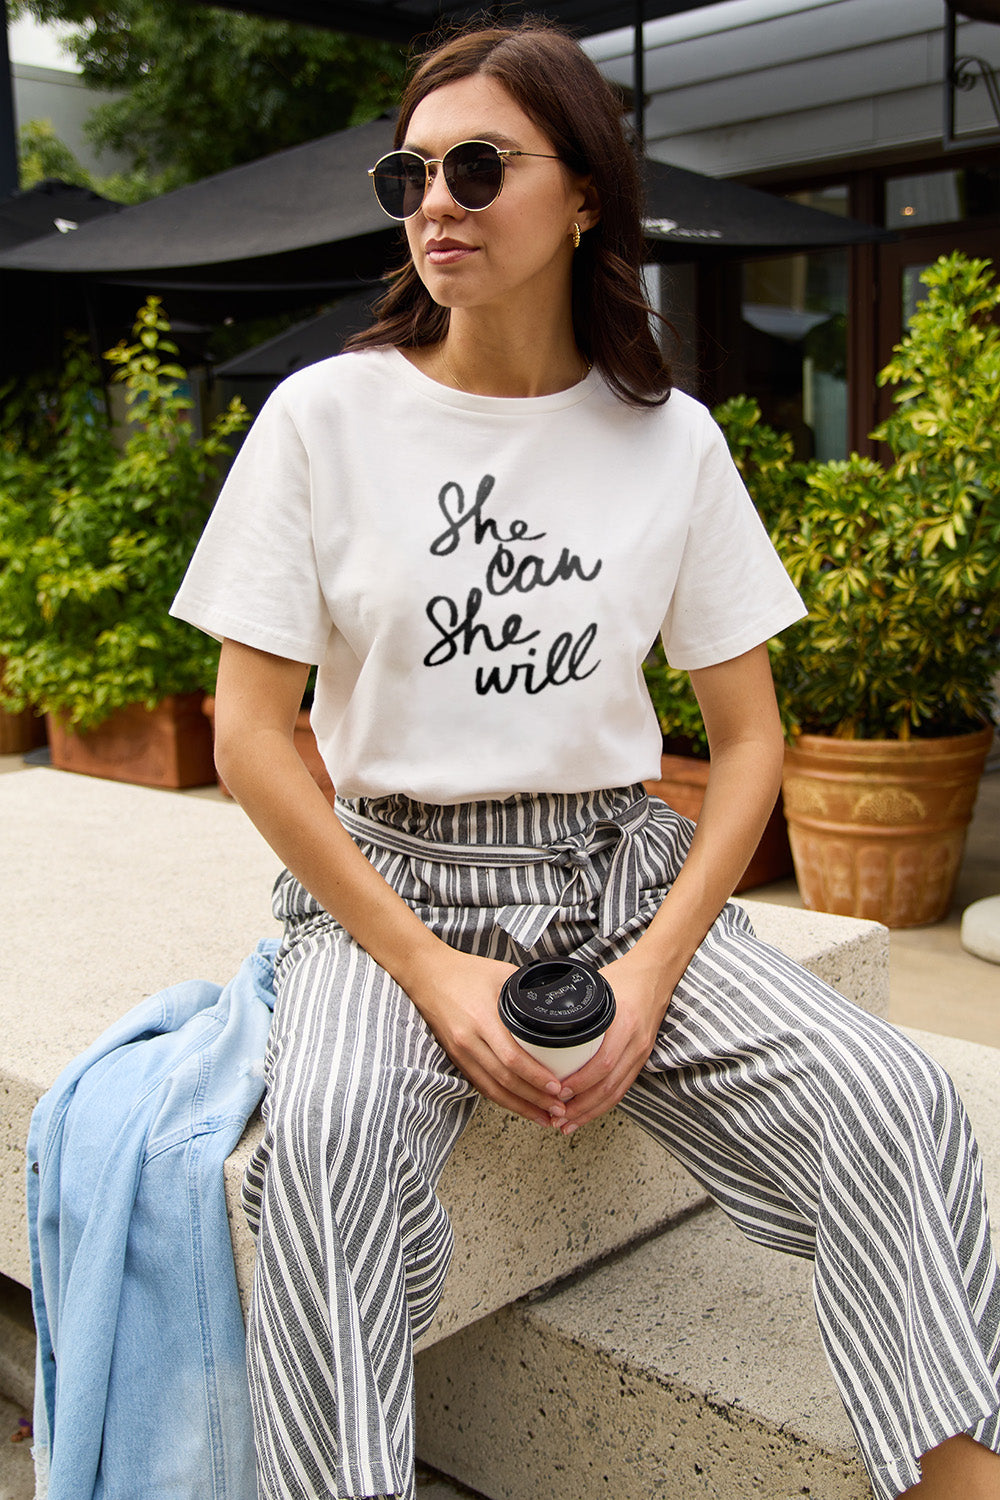 Simply Love Full Size SHE CAN SHE WILL Short Sleeve T-Shirt